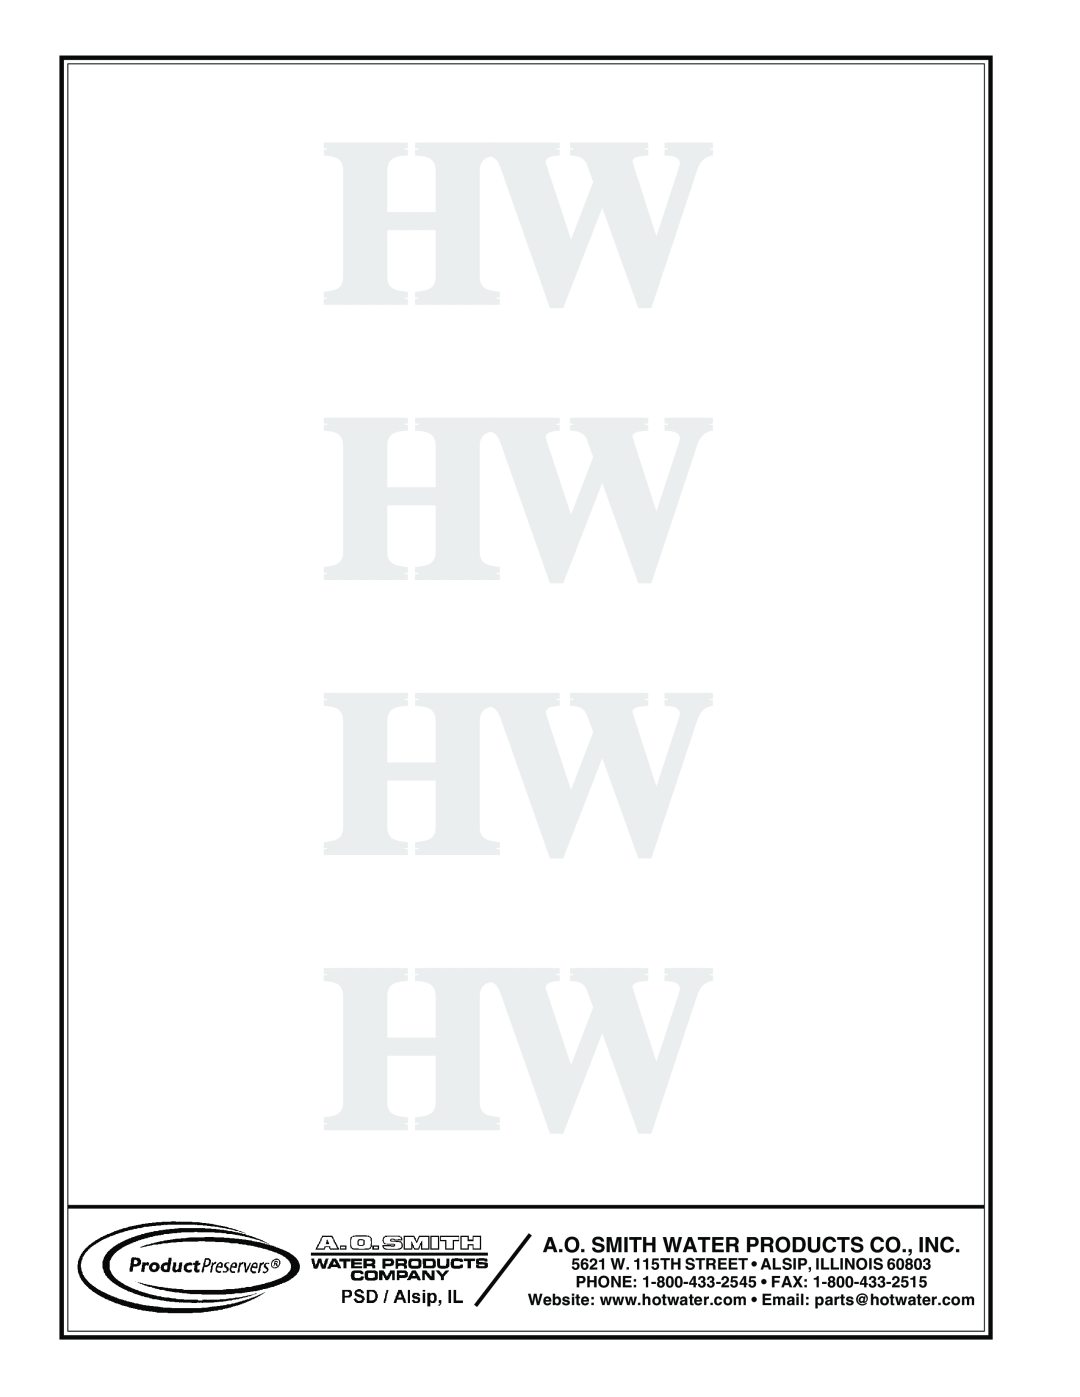 A.O. Smith HW 300 THRU HW 670 manual Hw Hw Hw Hw, A.O. Smith Water Products Co., Inc 